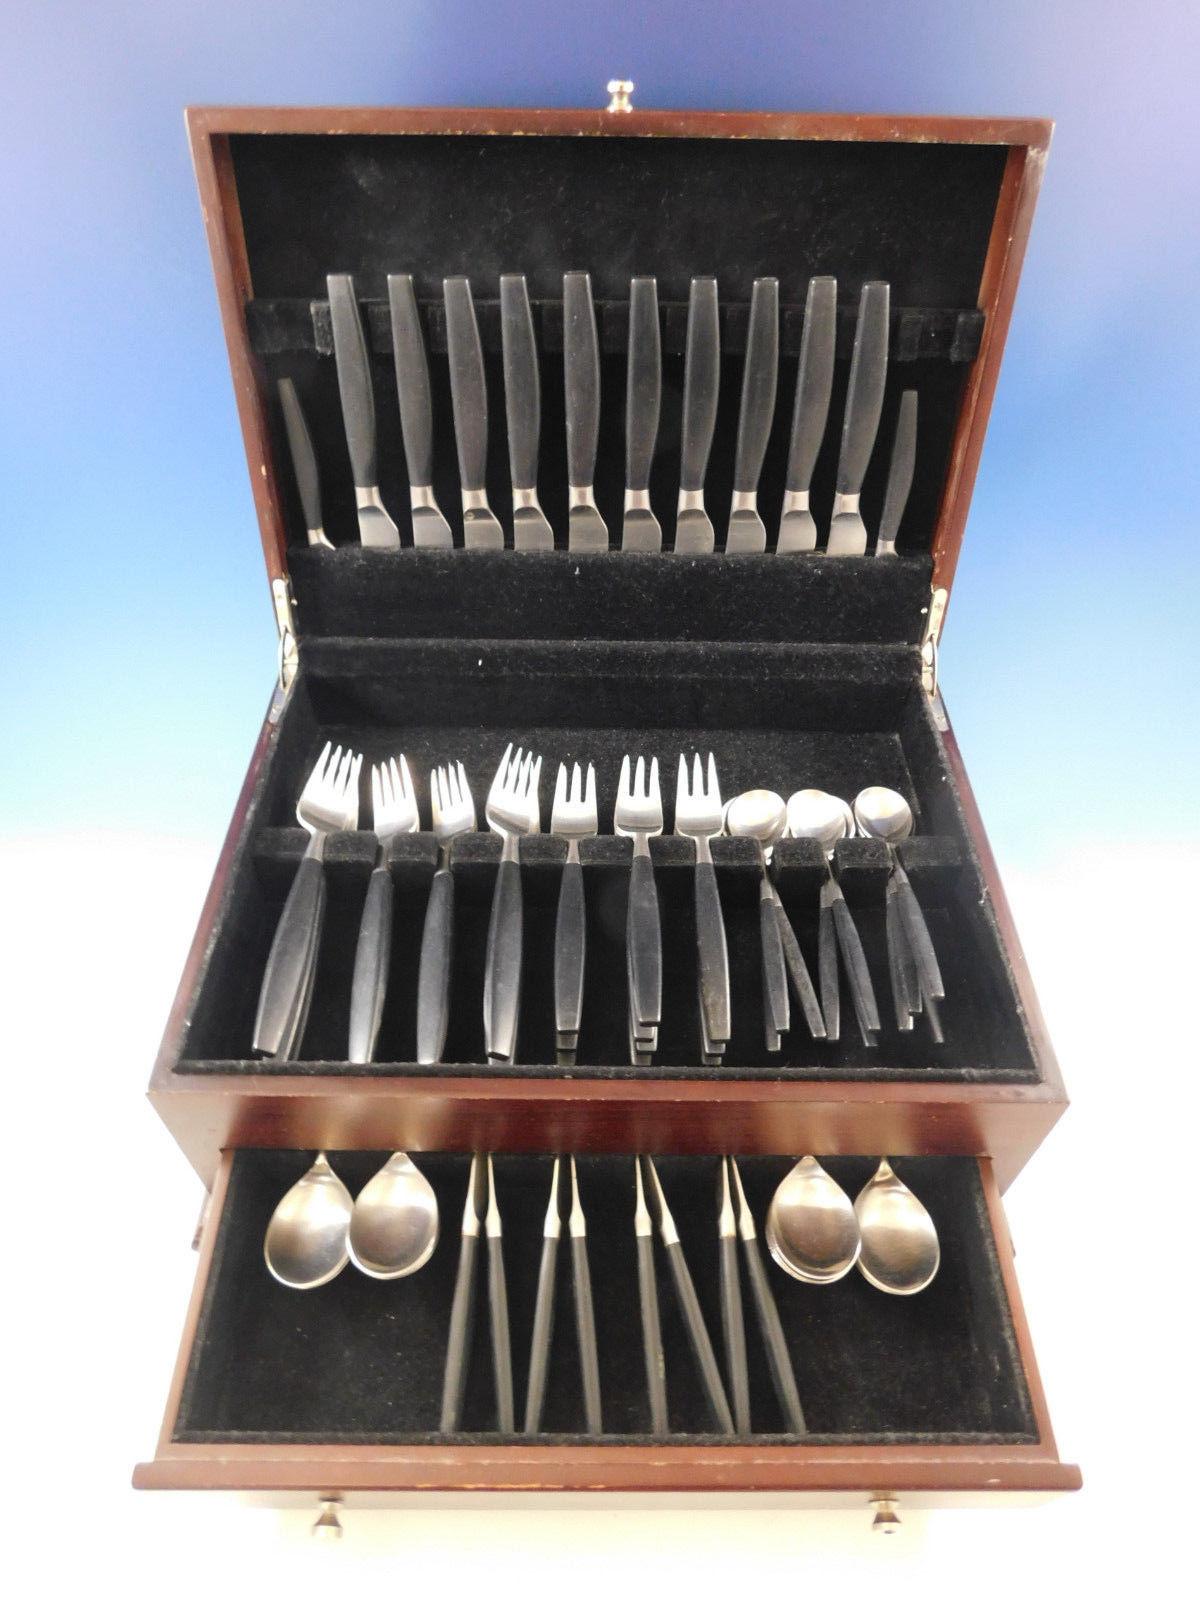 Lion-Black by Hackman Finland stainless steel flatware set, 60 pieces. This scarce set includes:

10 knives, 8